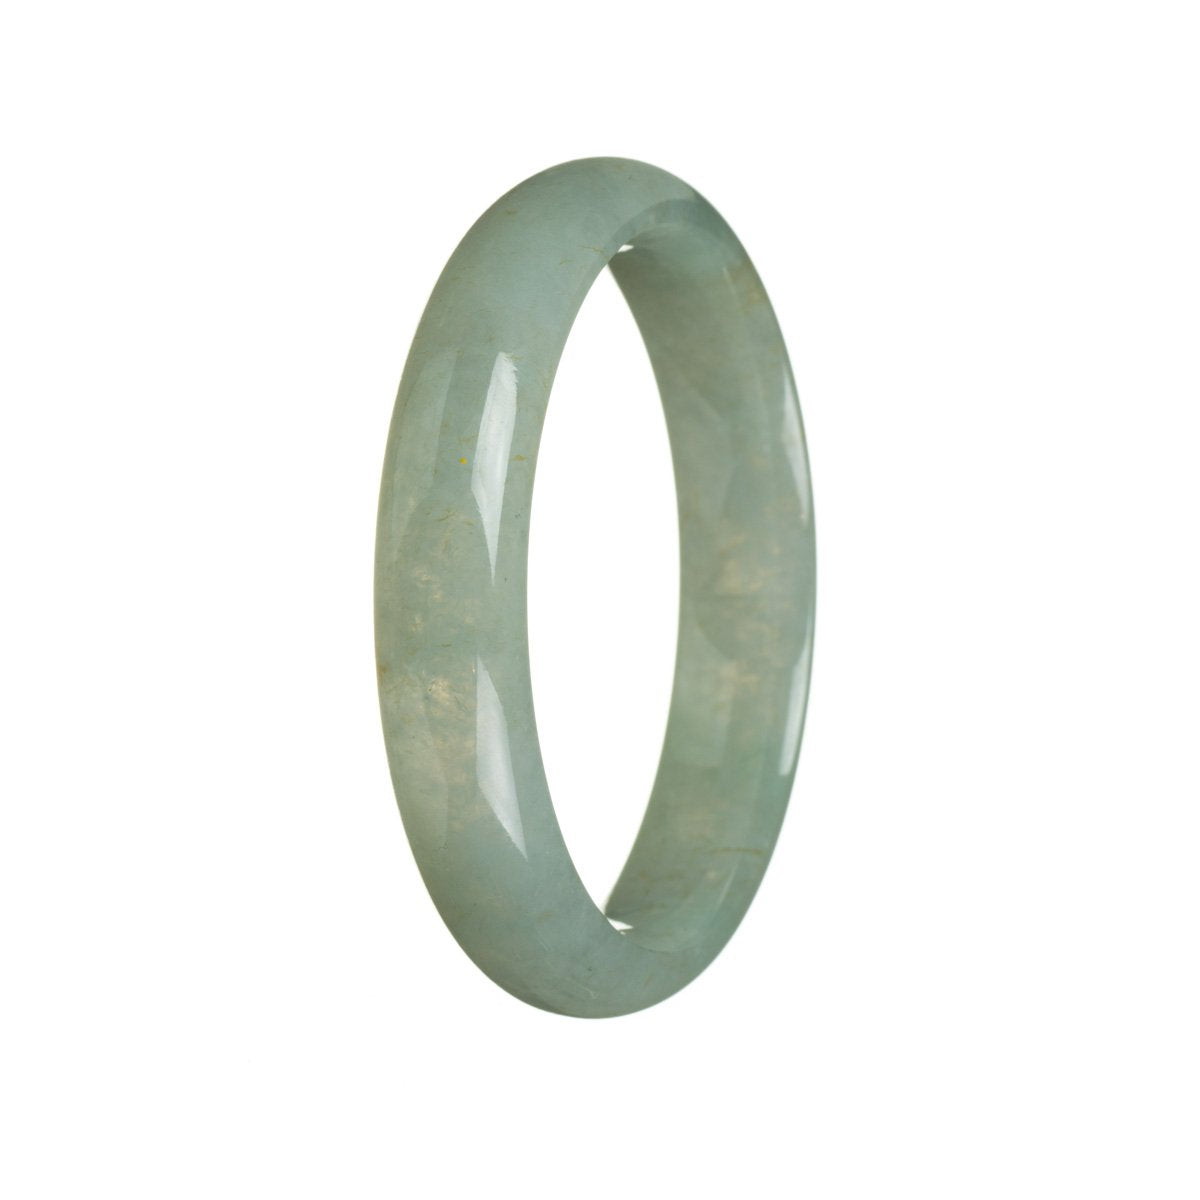 A high-quality grey Burmese jade bangle bracelet, featuring a 56mm half moon shape. Perfect for adding an elegant touch to any outfit.